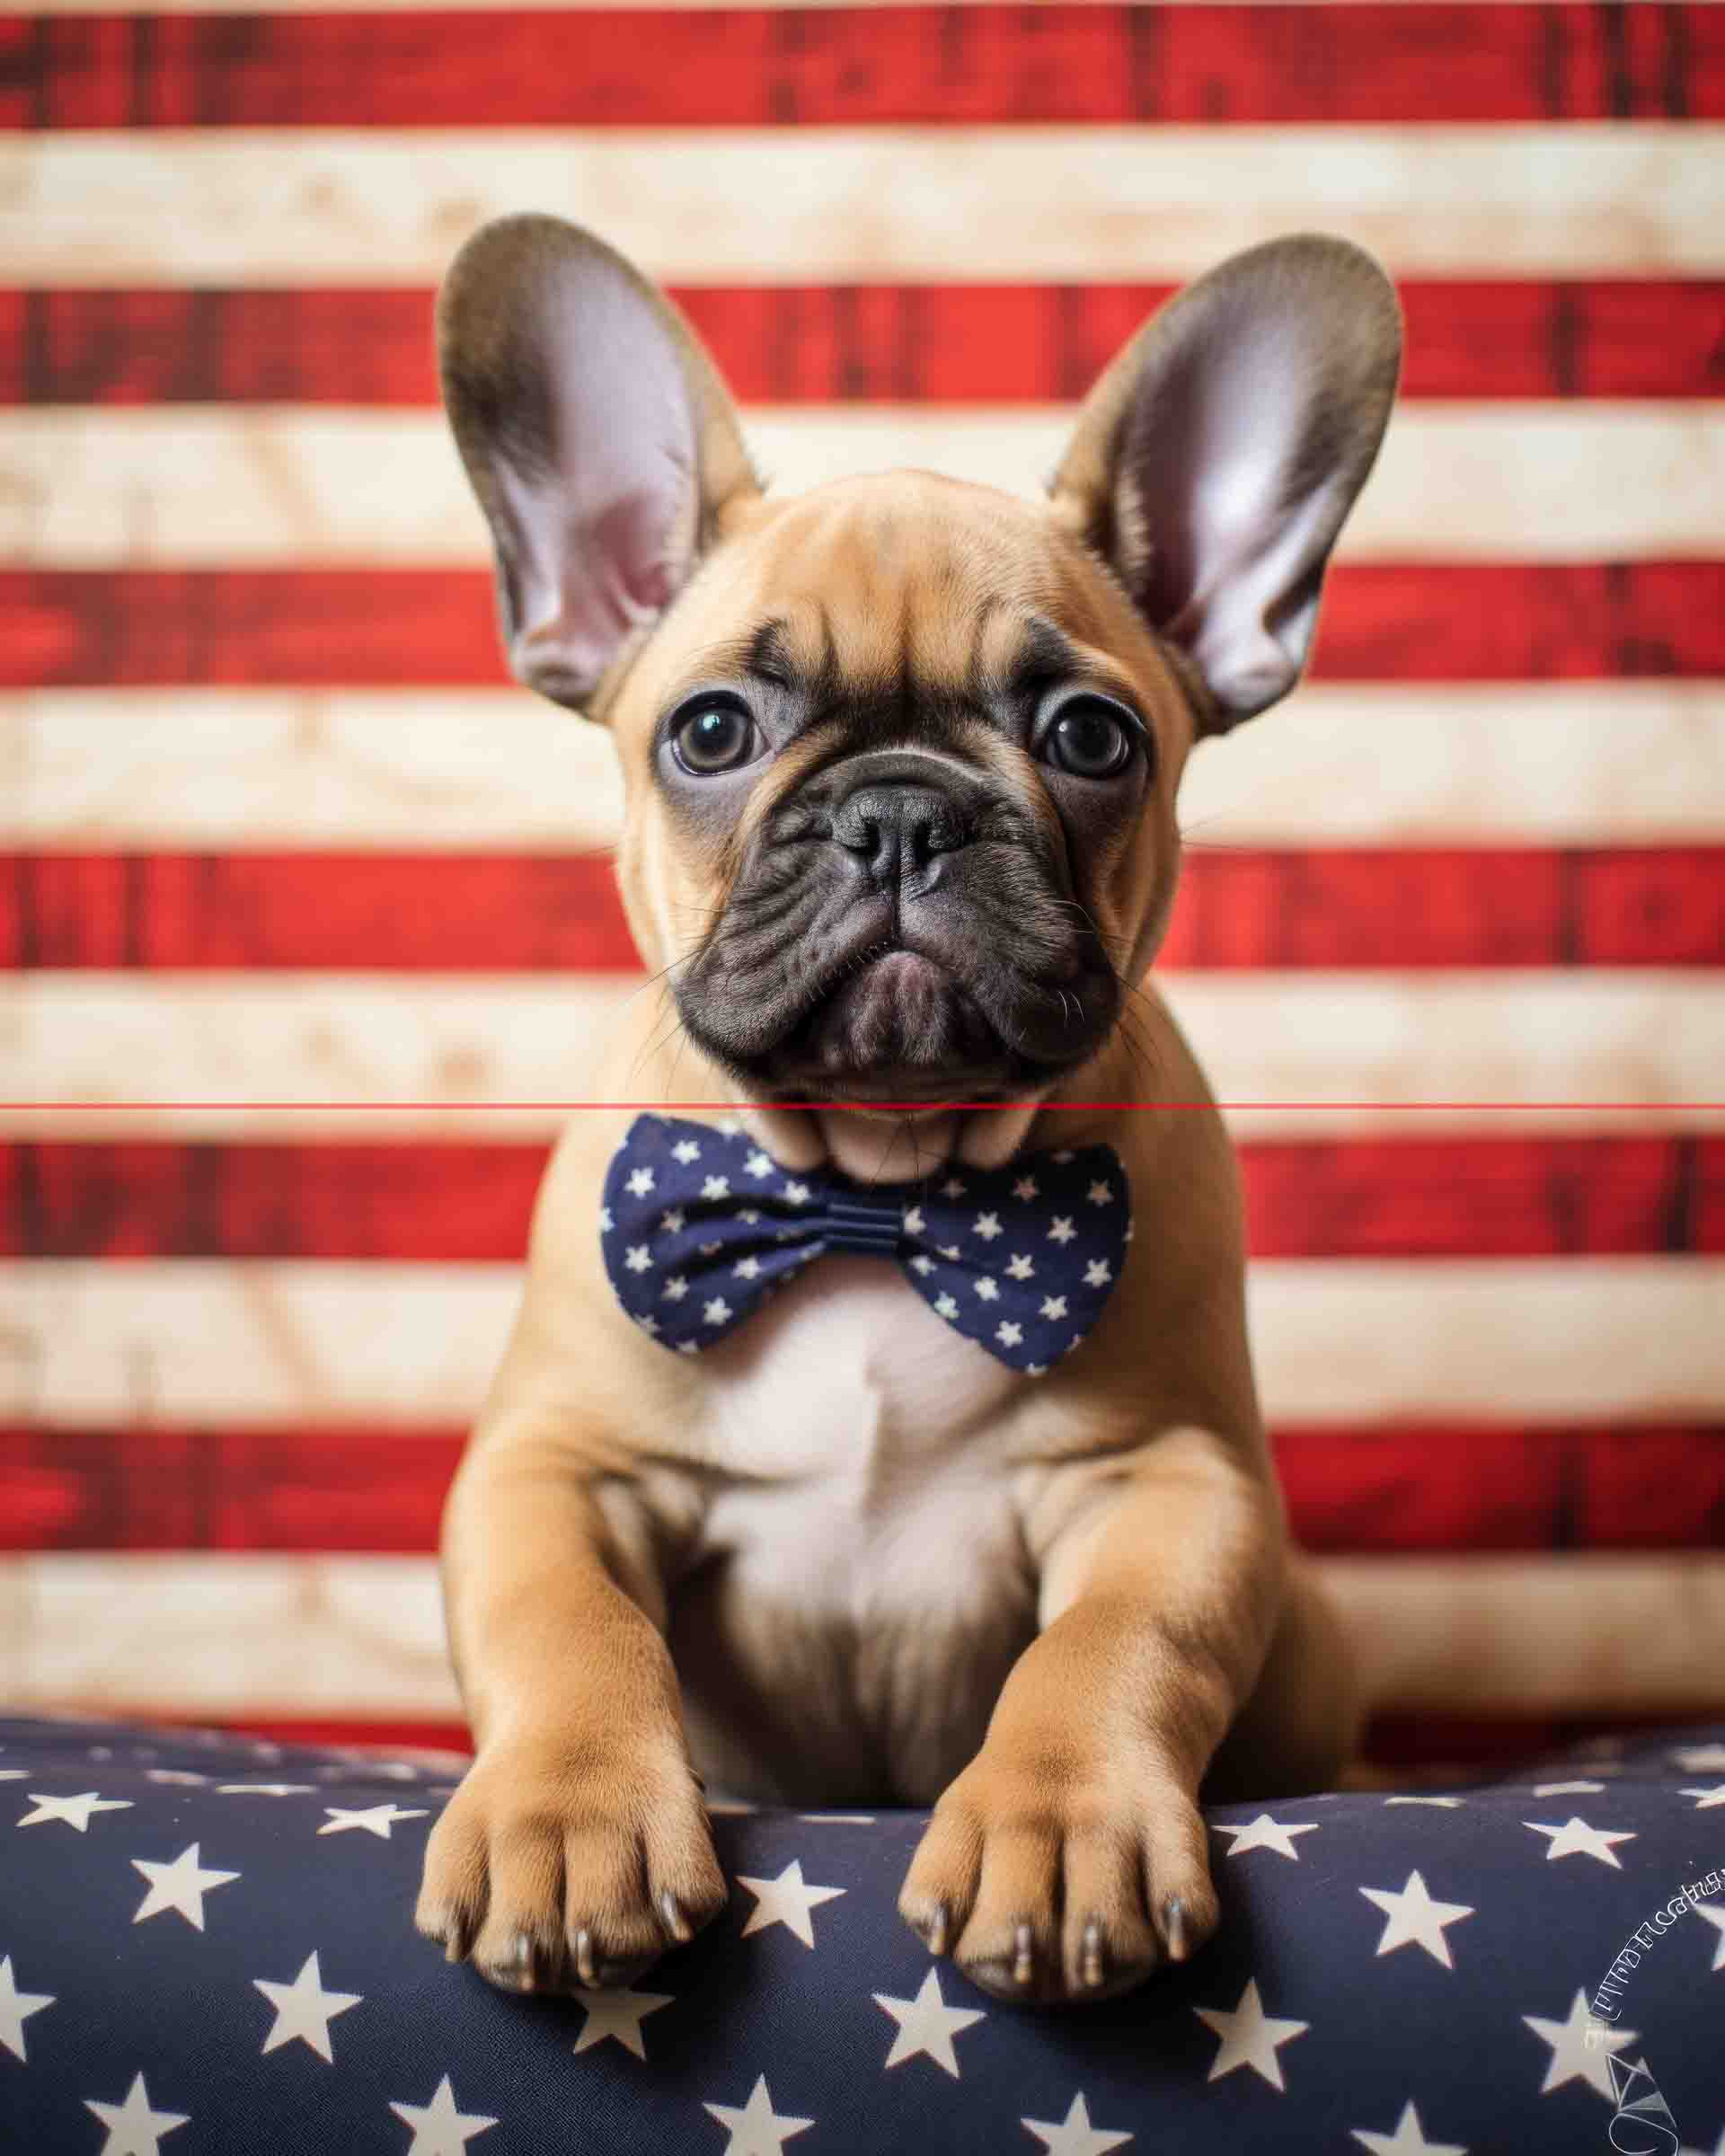 A picture of a fawn french bulldog puppy sits in front of an american flag, looking directly at the viewer with an attentive expression, showcasing large bat-like ears and a wrinkled face.